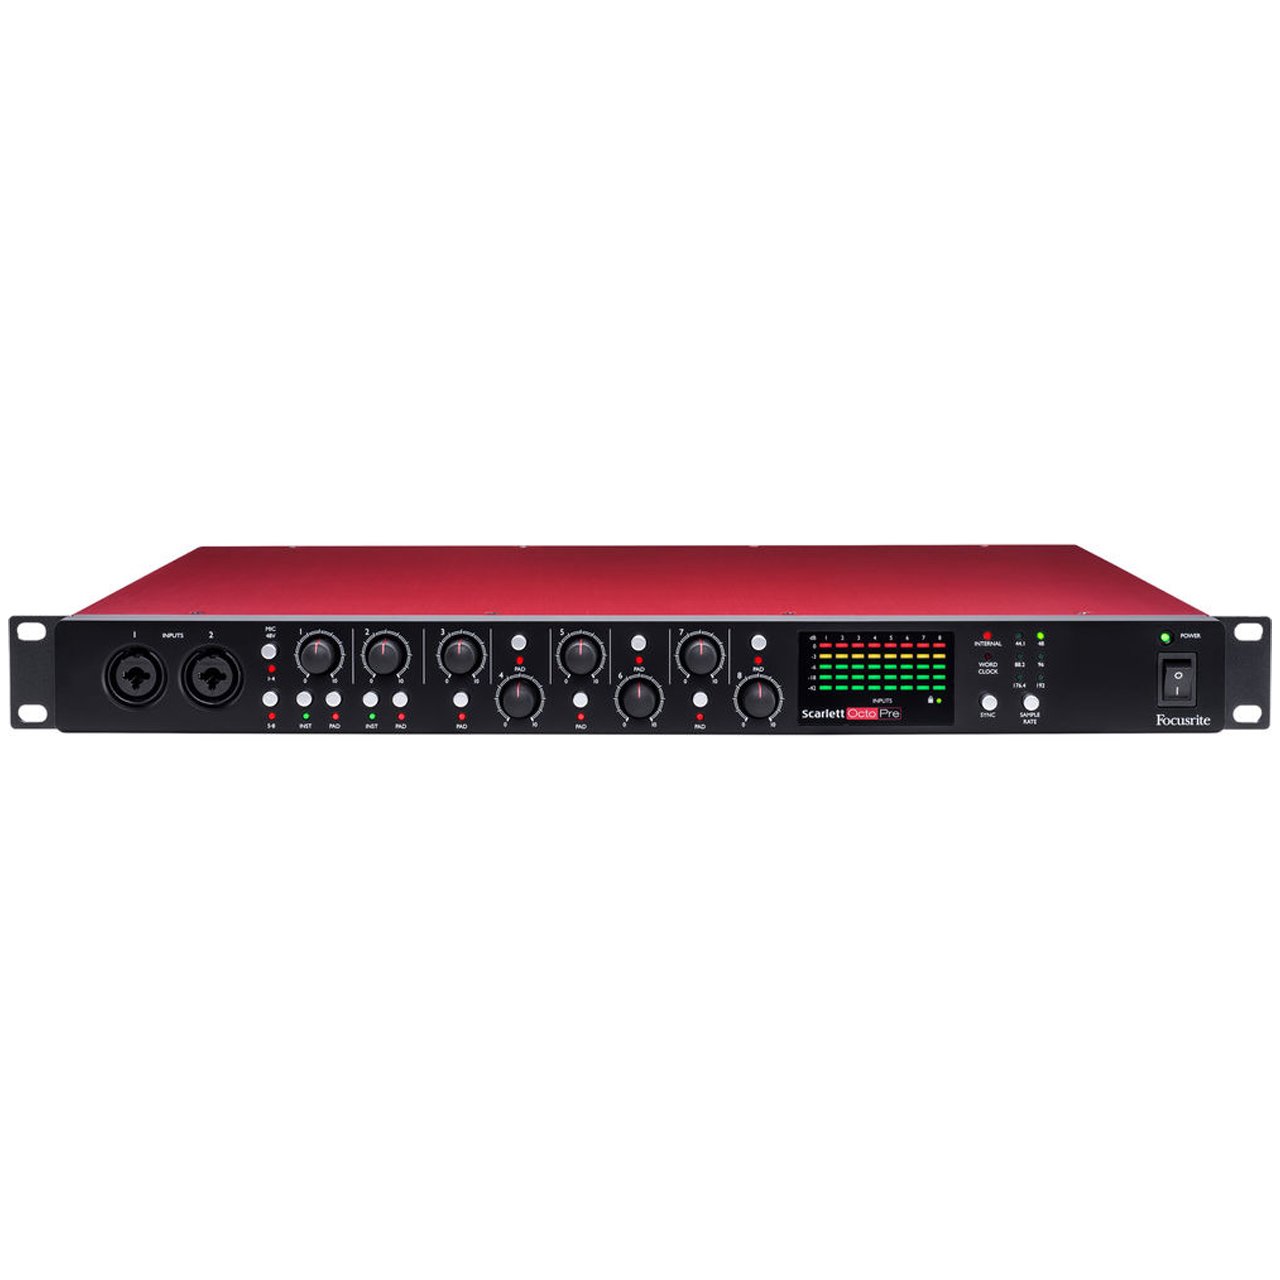 Preamps/Channel Strips - Focusrite Scarlett OctoPre - 8-channel Mic Preamp With ADAT Connectivity